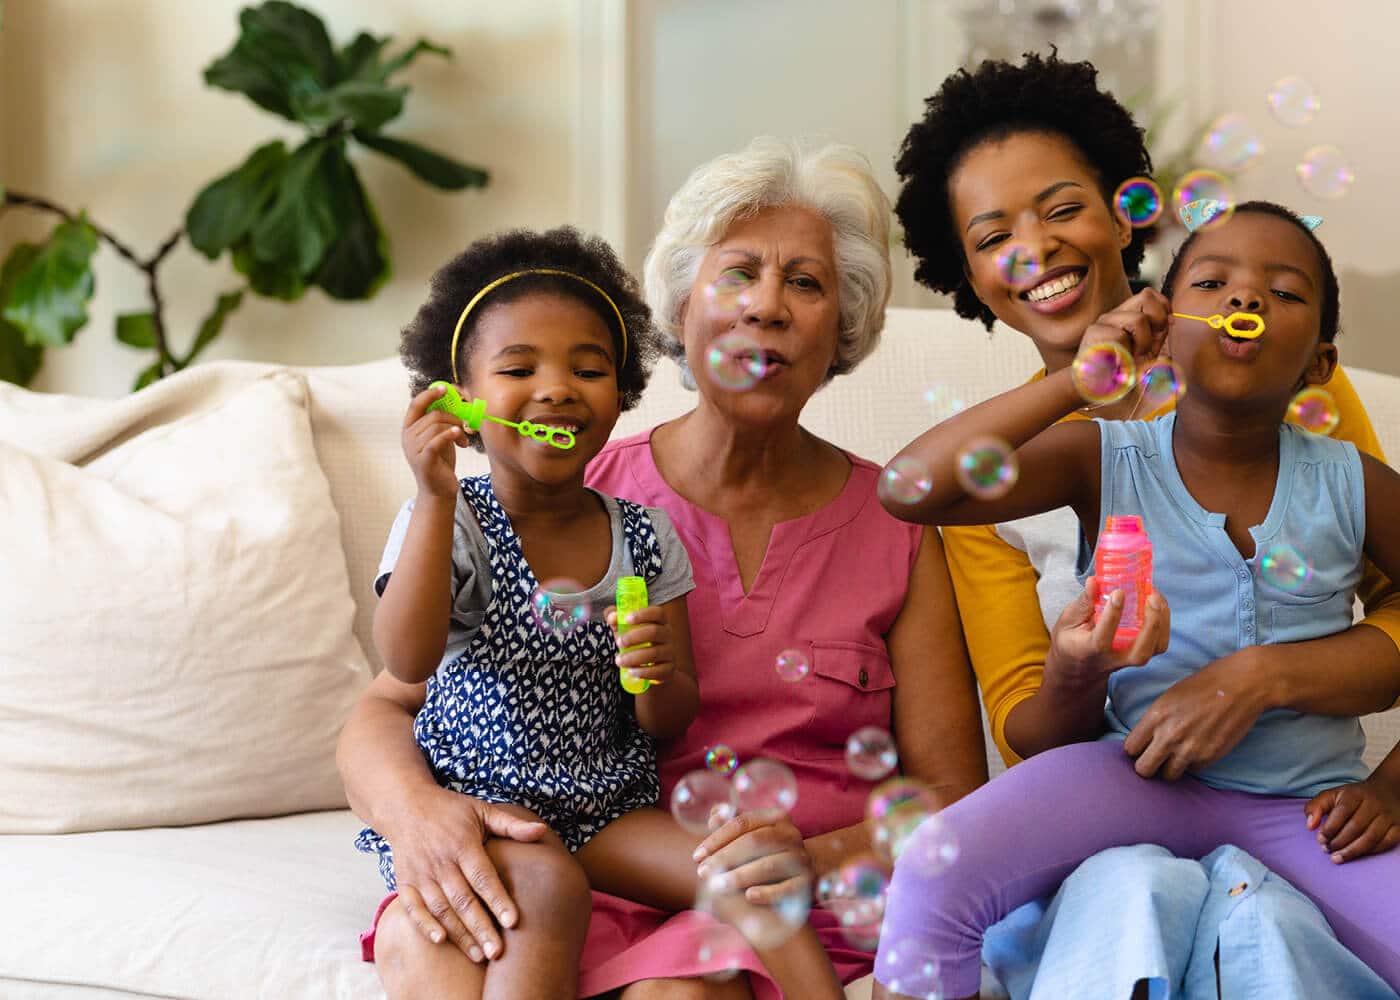 grandma and mom smiling and laughing while granddaughters blow bubbles